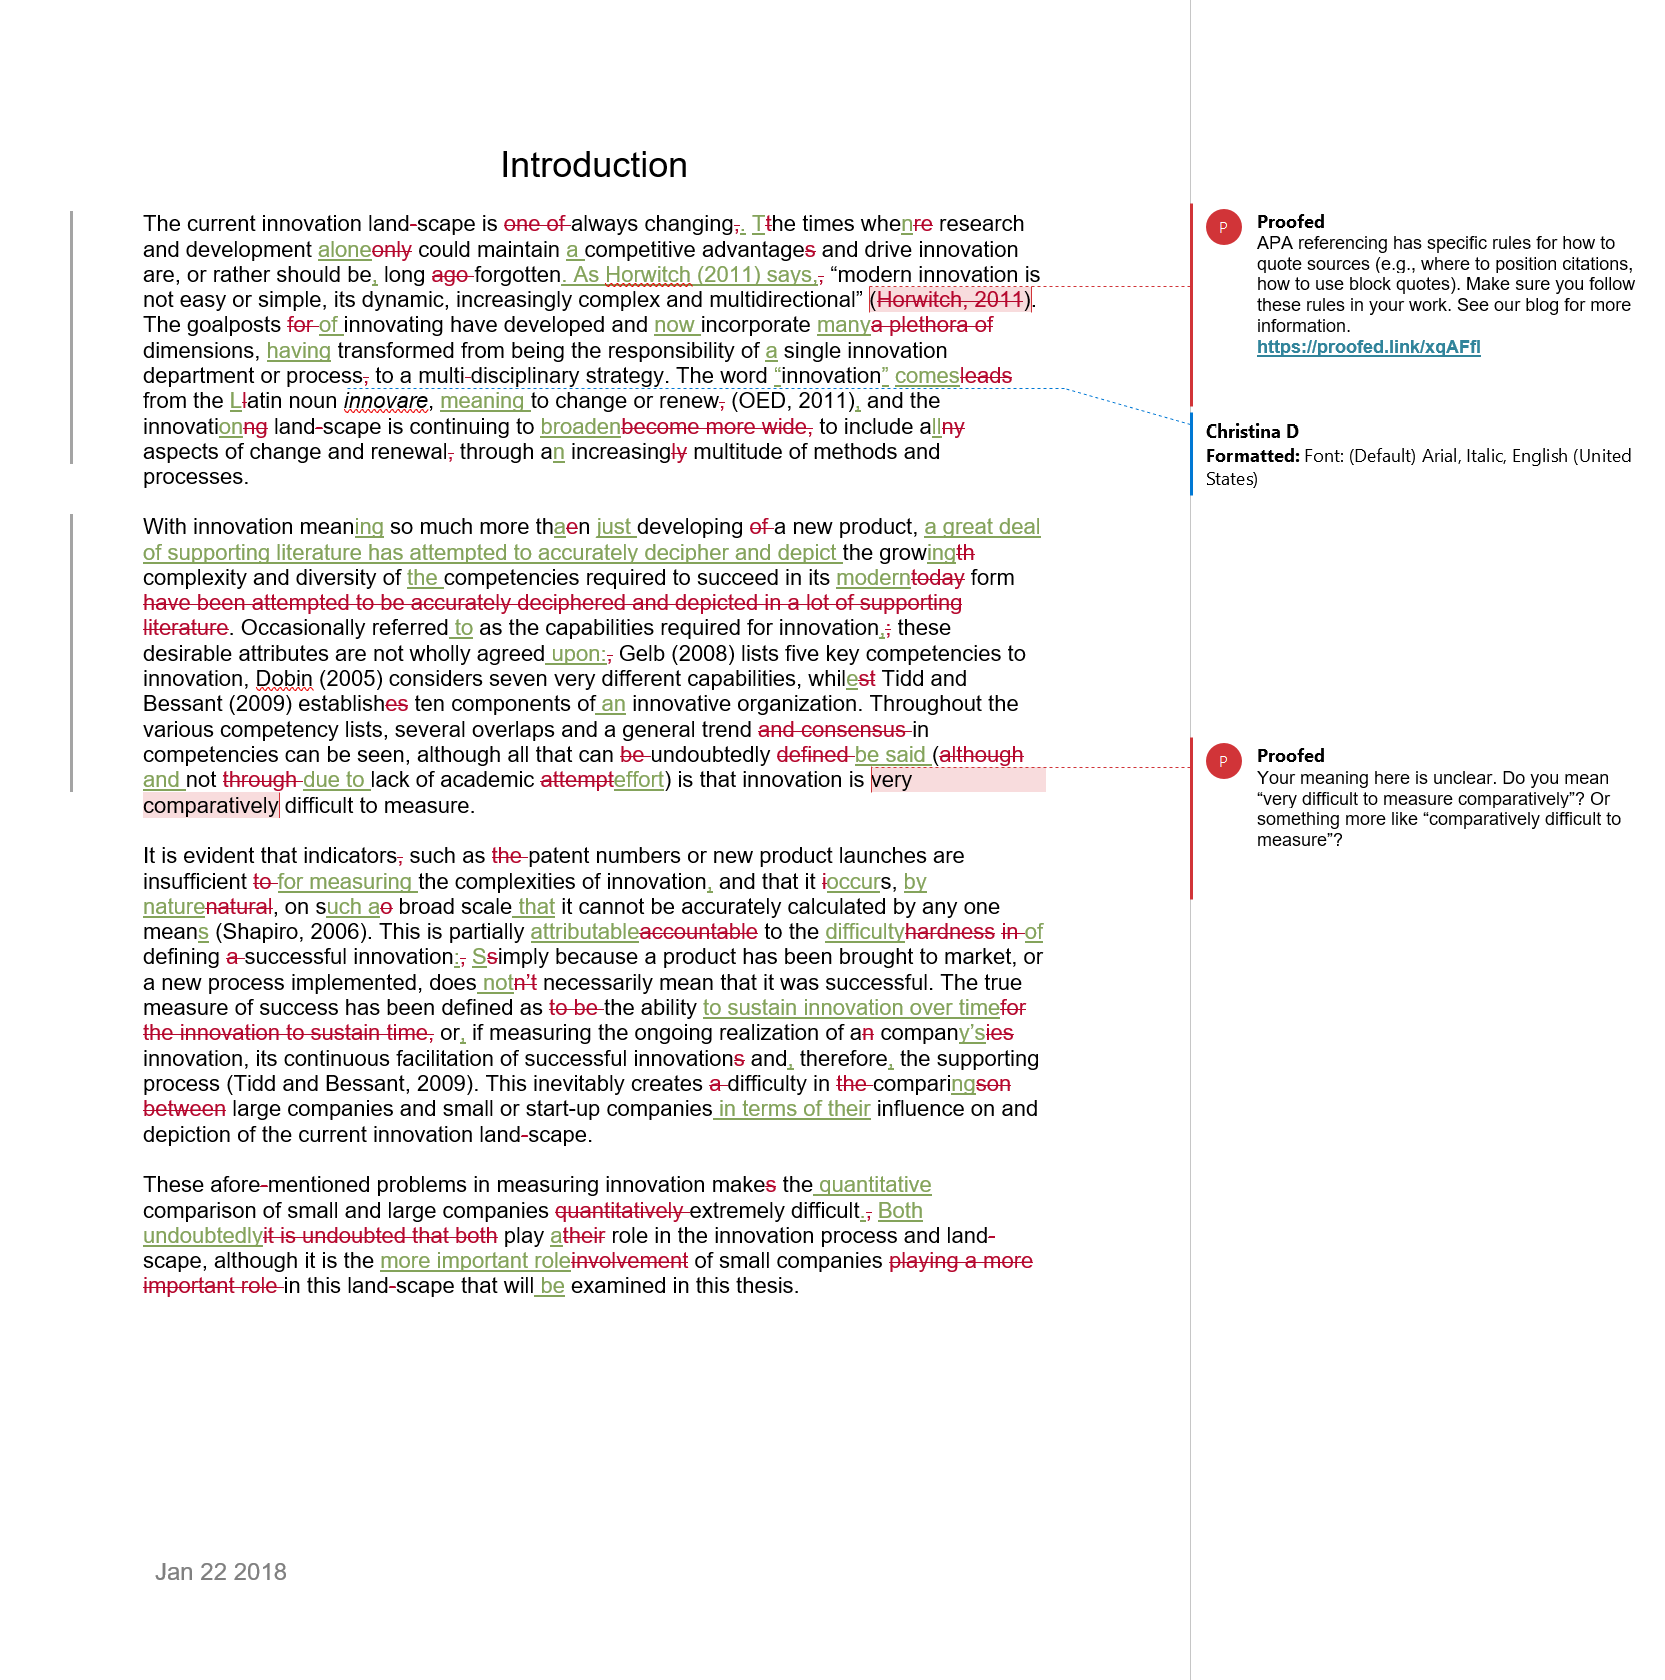 Dissertation Proofreading Example (After Editing)